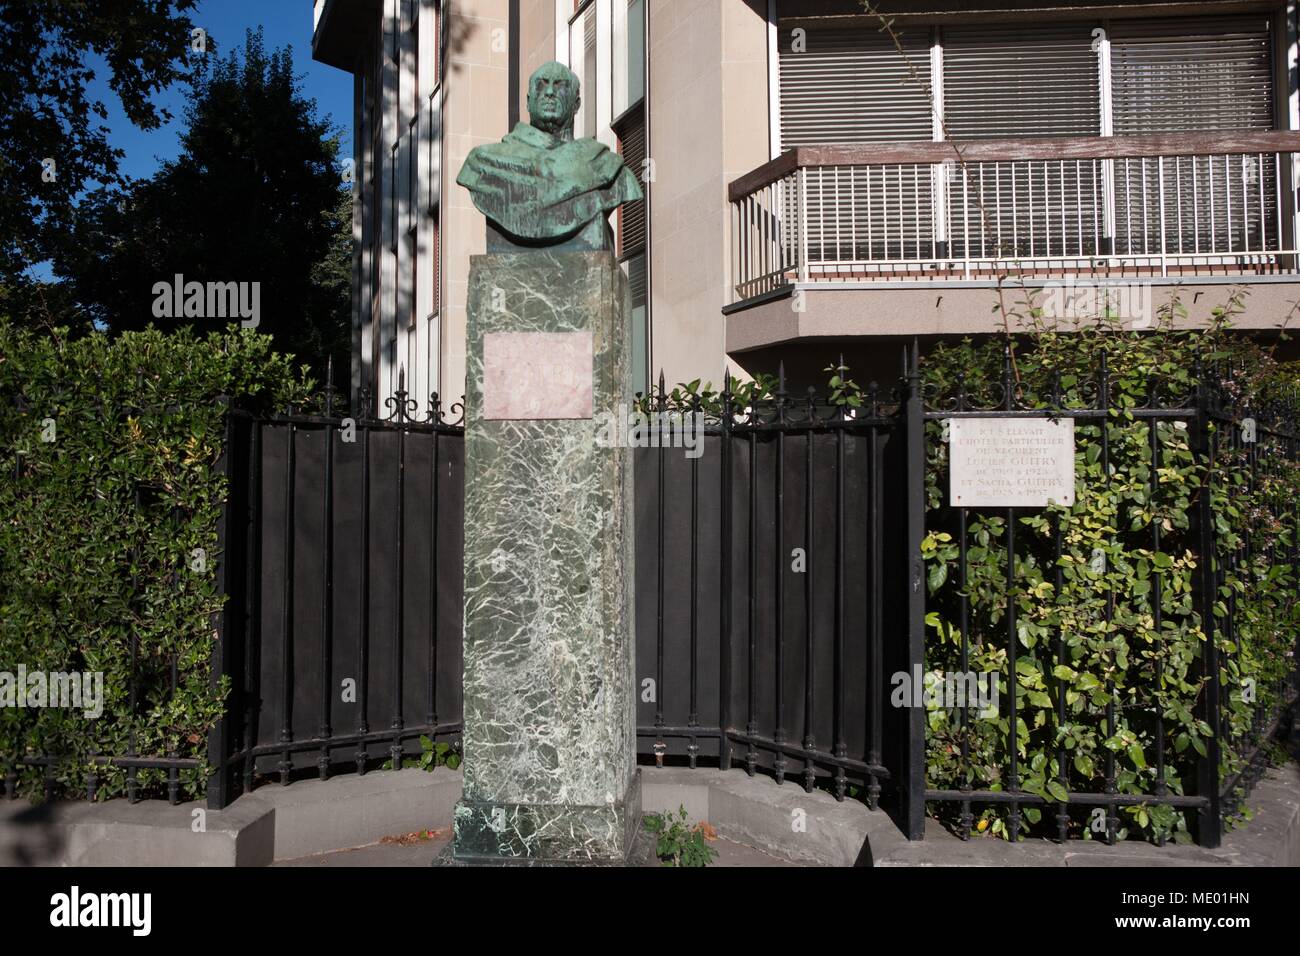 Paris, 7th arrondissement, 18 avenue Elysée-Reclus, statue of Lucien Guitry in front of the Hotel particulier where Sacha Guitry lived Stock Photo